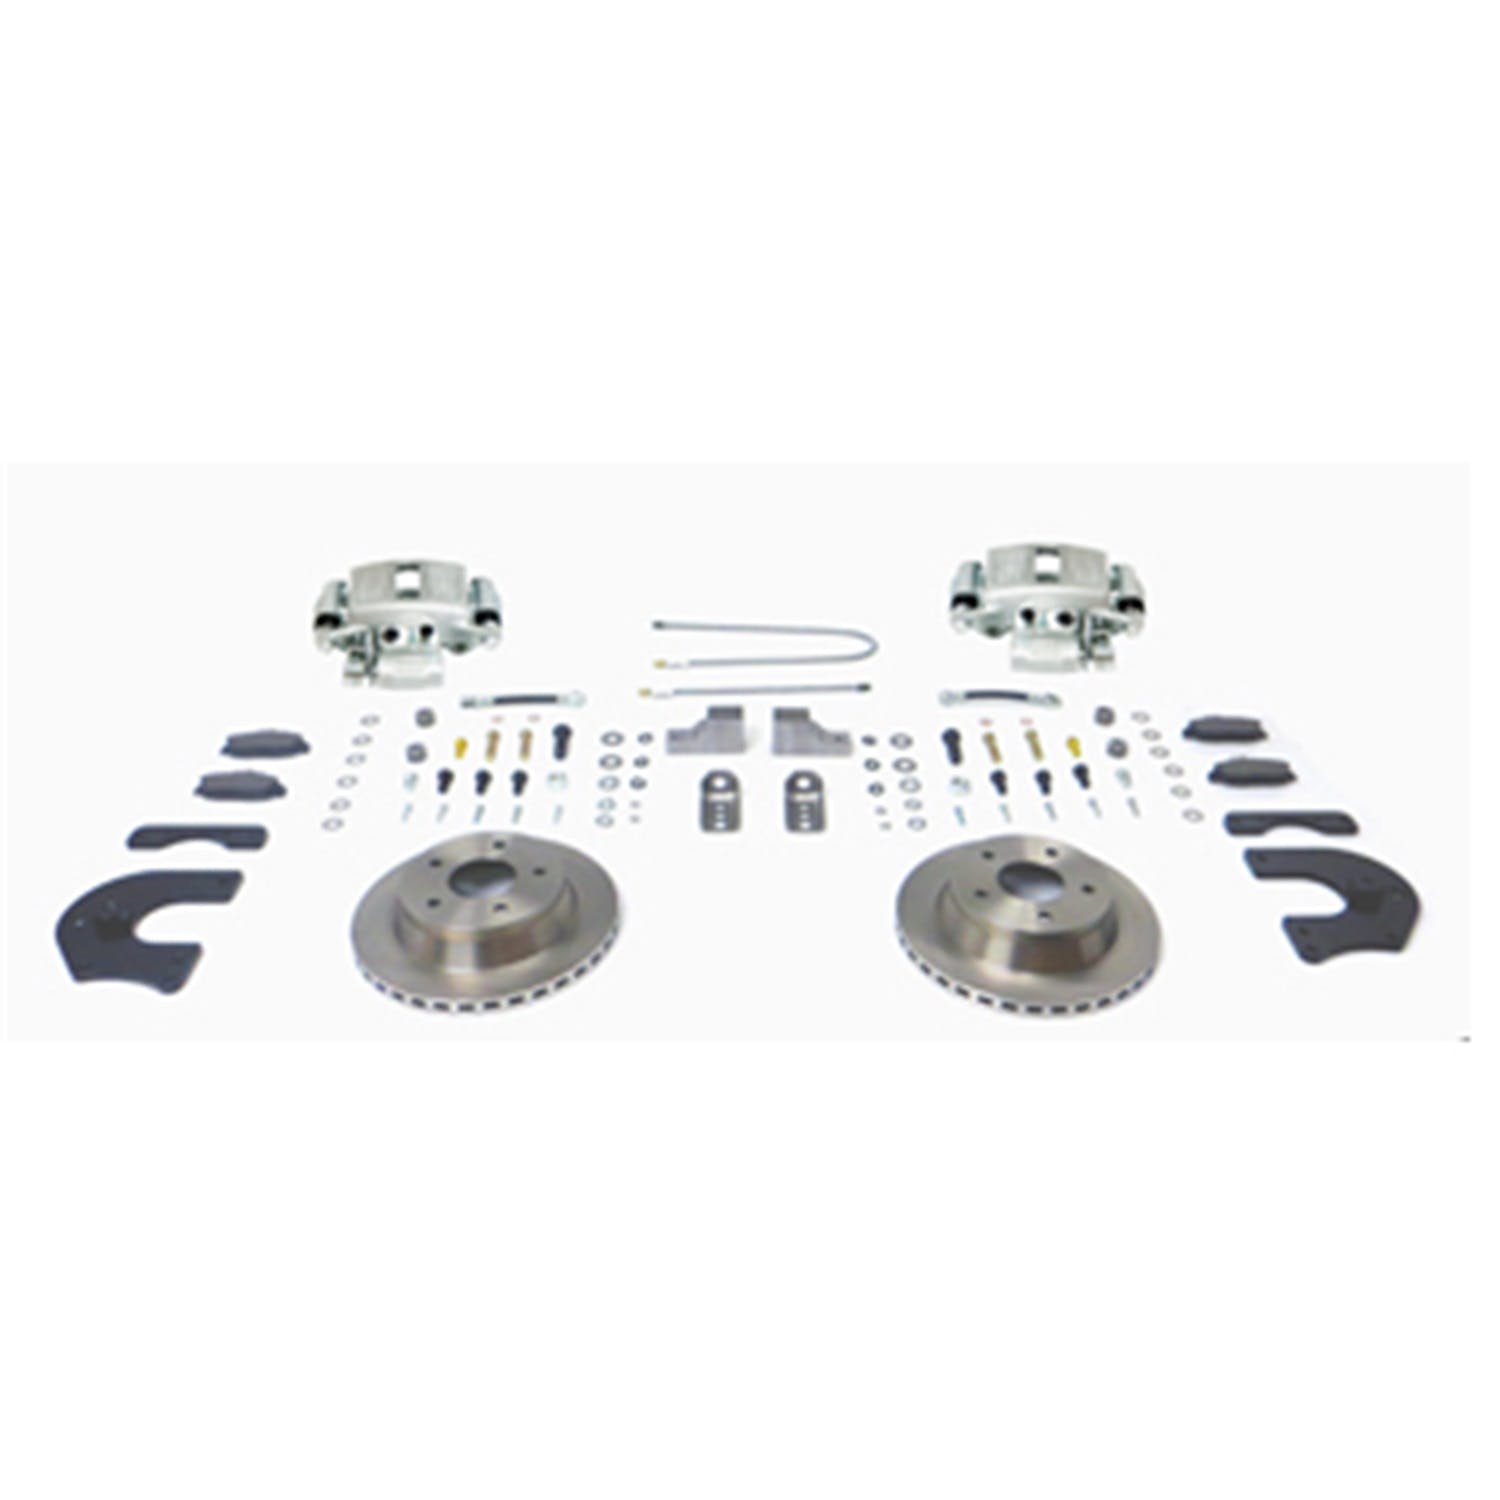 Stainless Steel Brakes A127BK Kit A127 w/black calipers